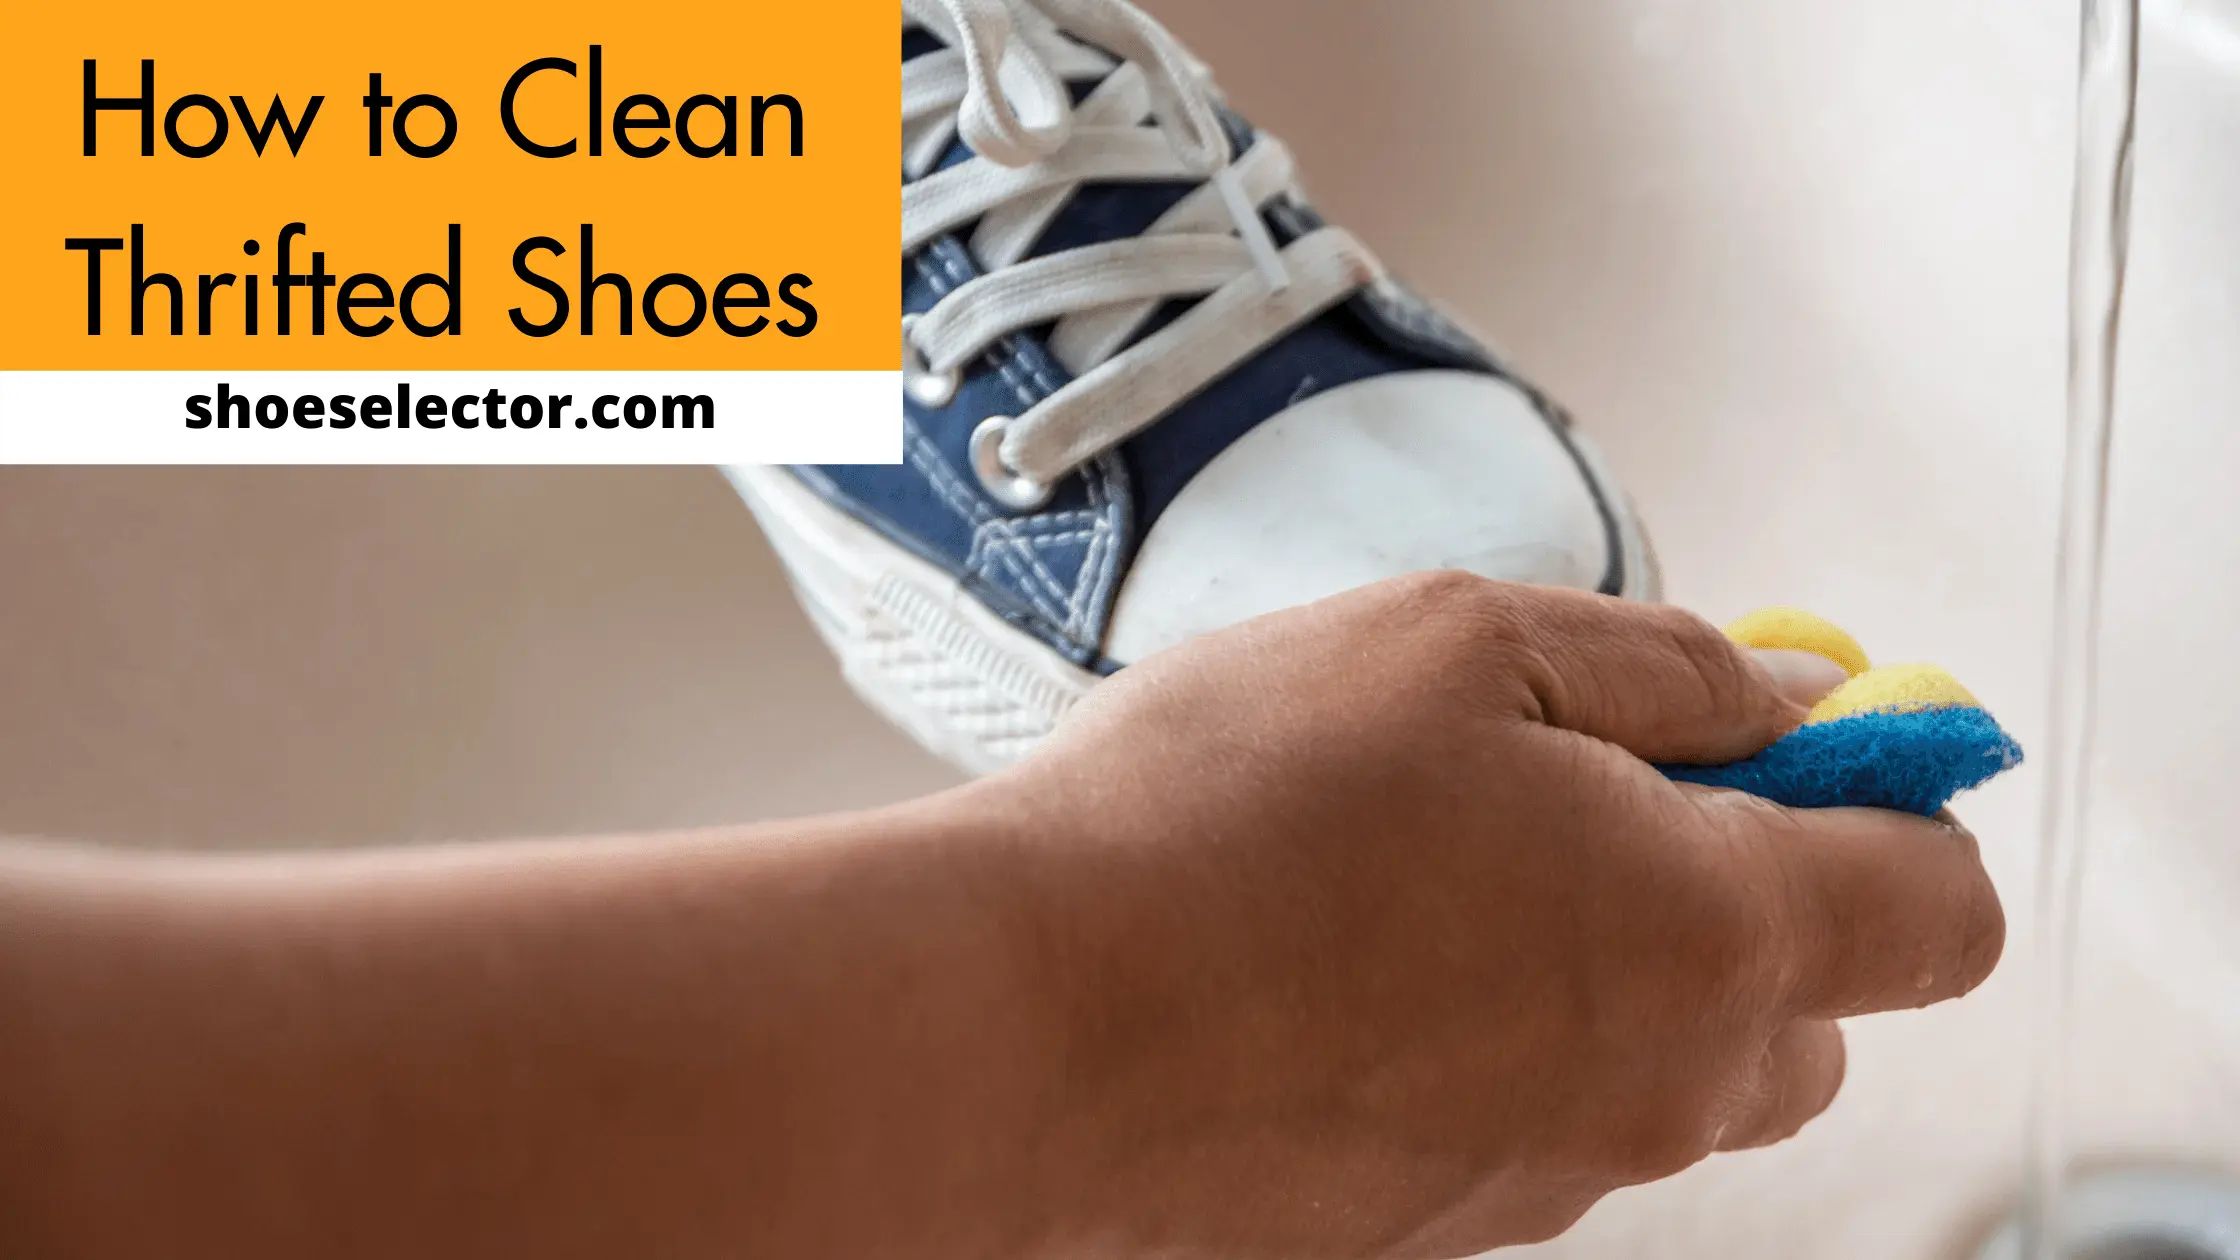 How to Clean Thrifted Shoes? - Simple Guide